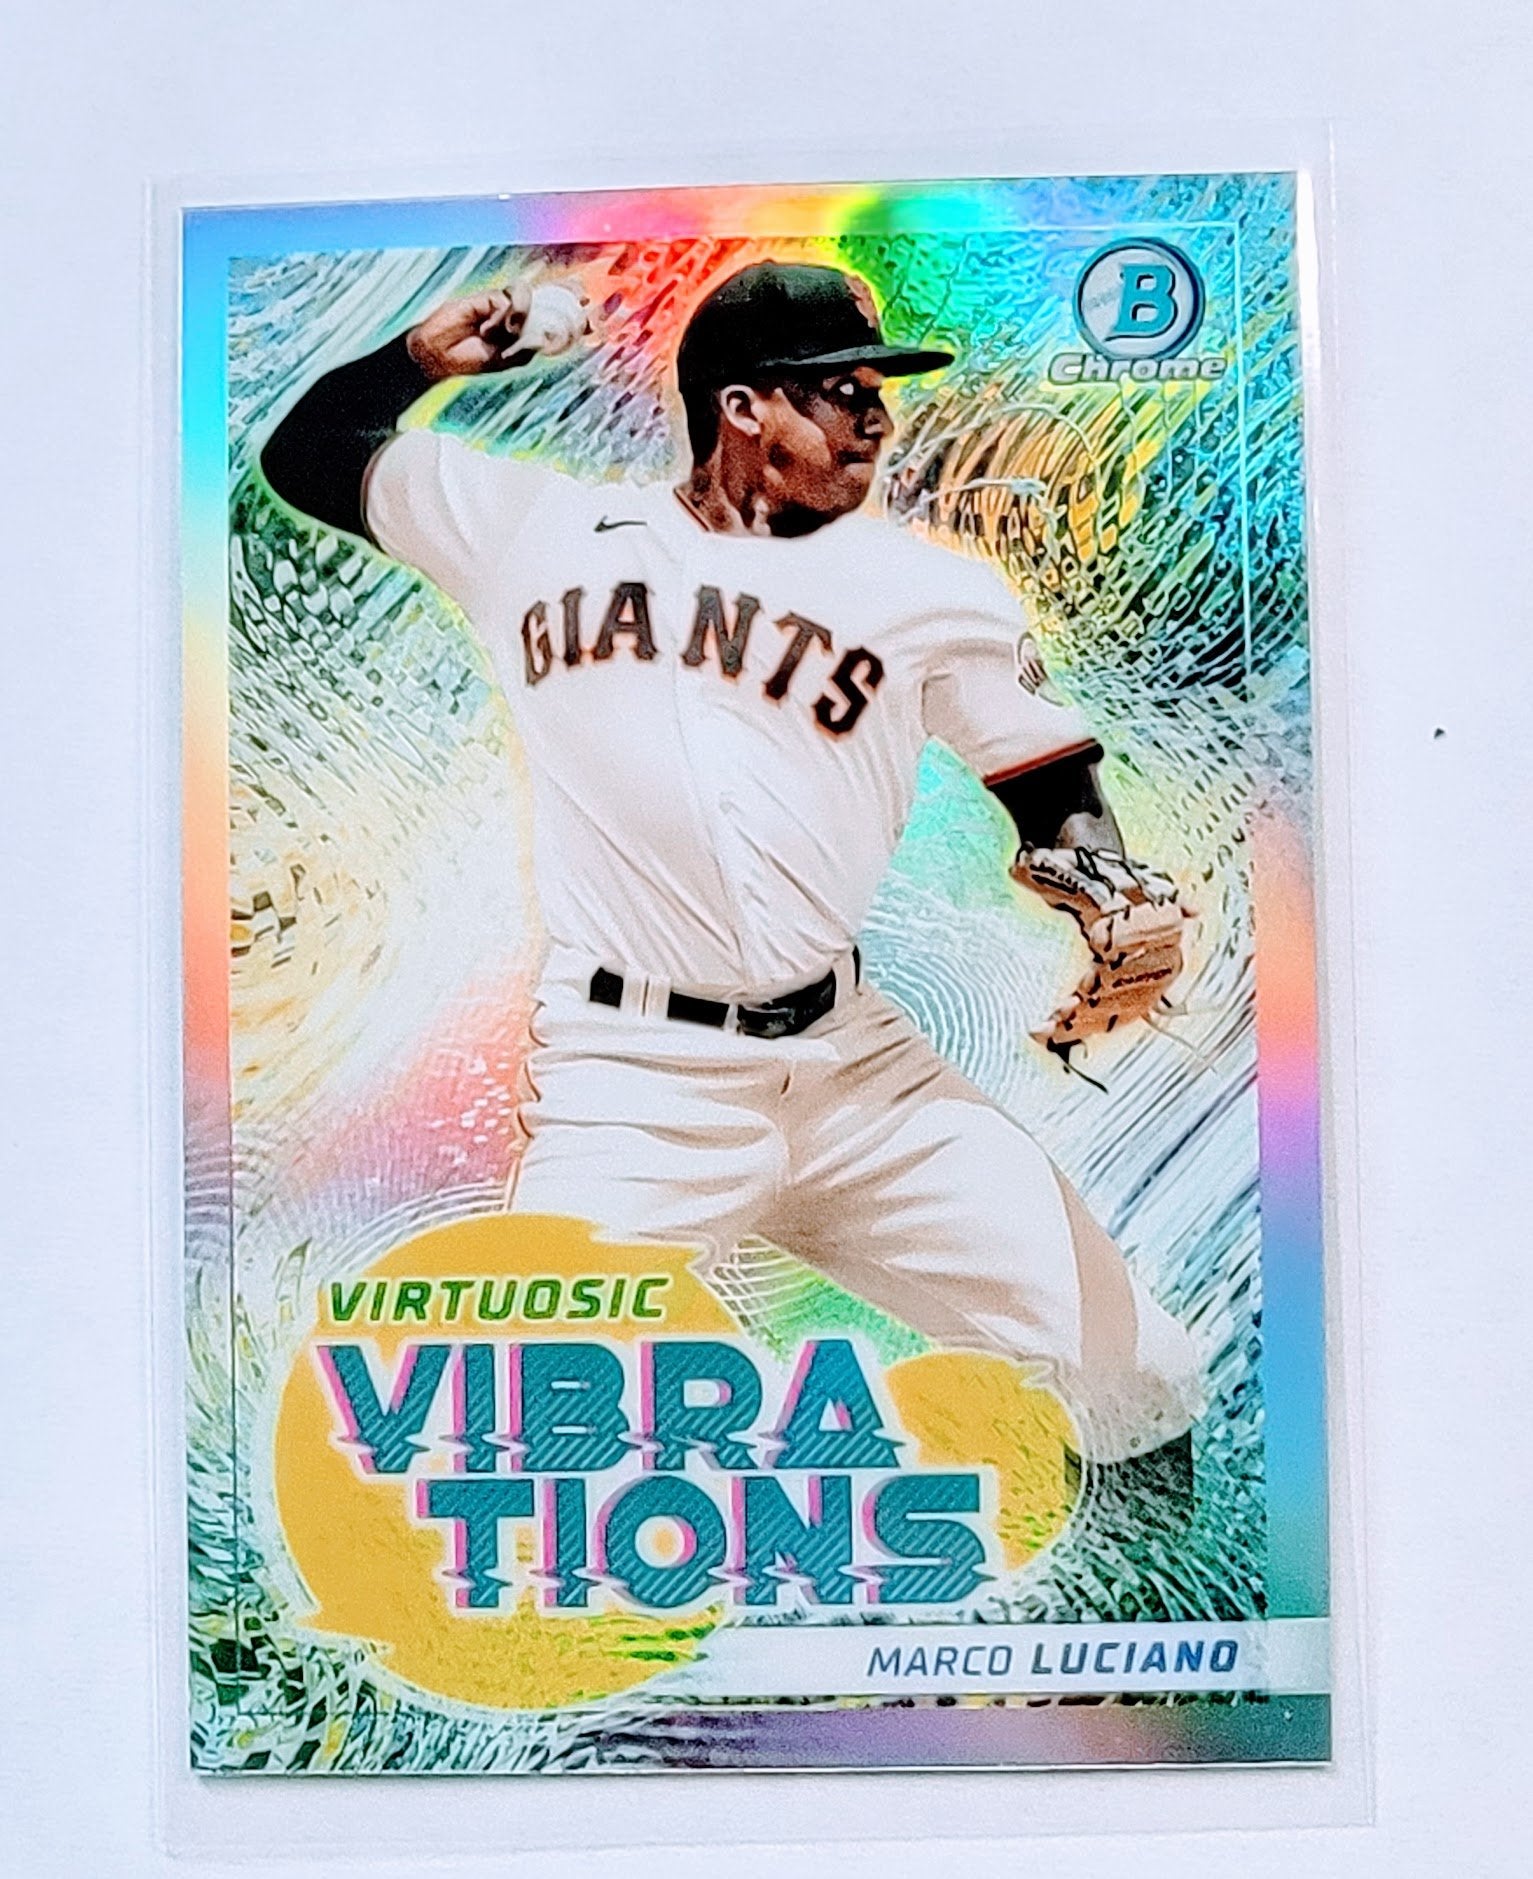 2022 Bowman Chrome Marco Luciano Virtuosic Vibrations Refractor Baseball Card AVM1 simple Xclusive Collectibles   